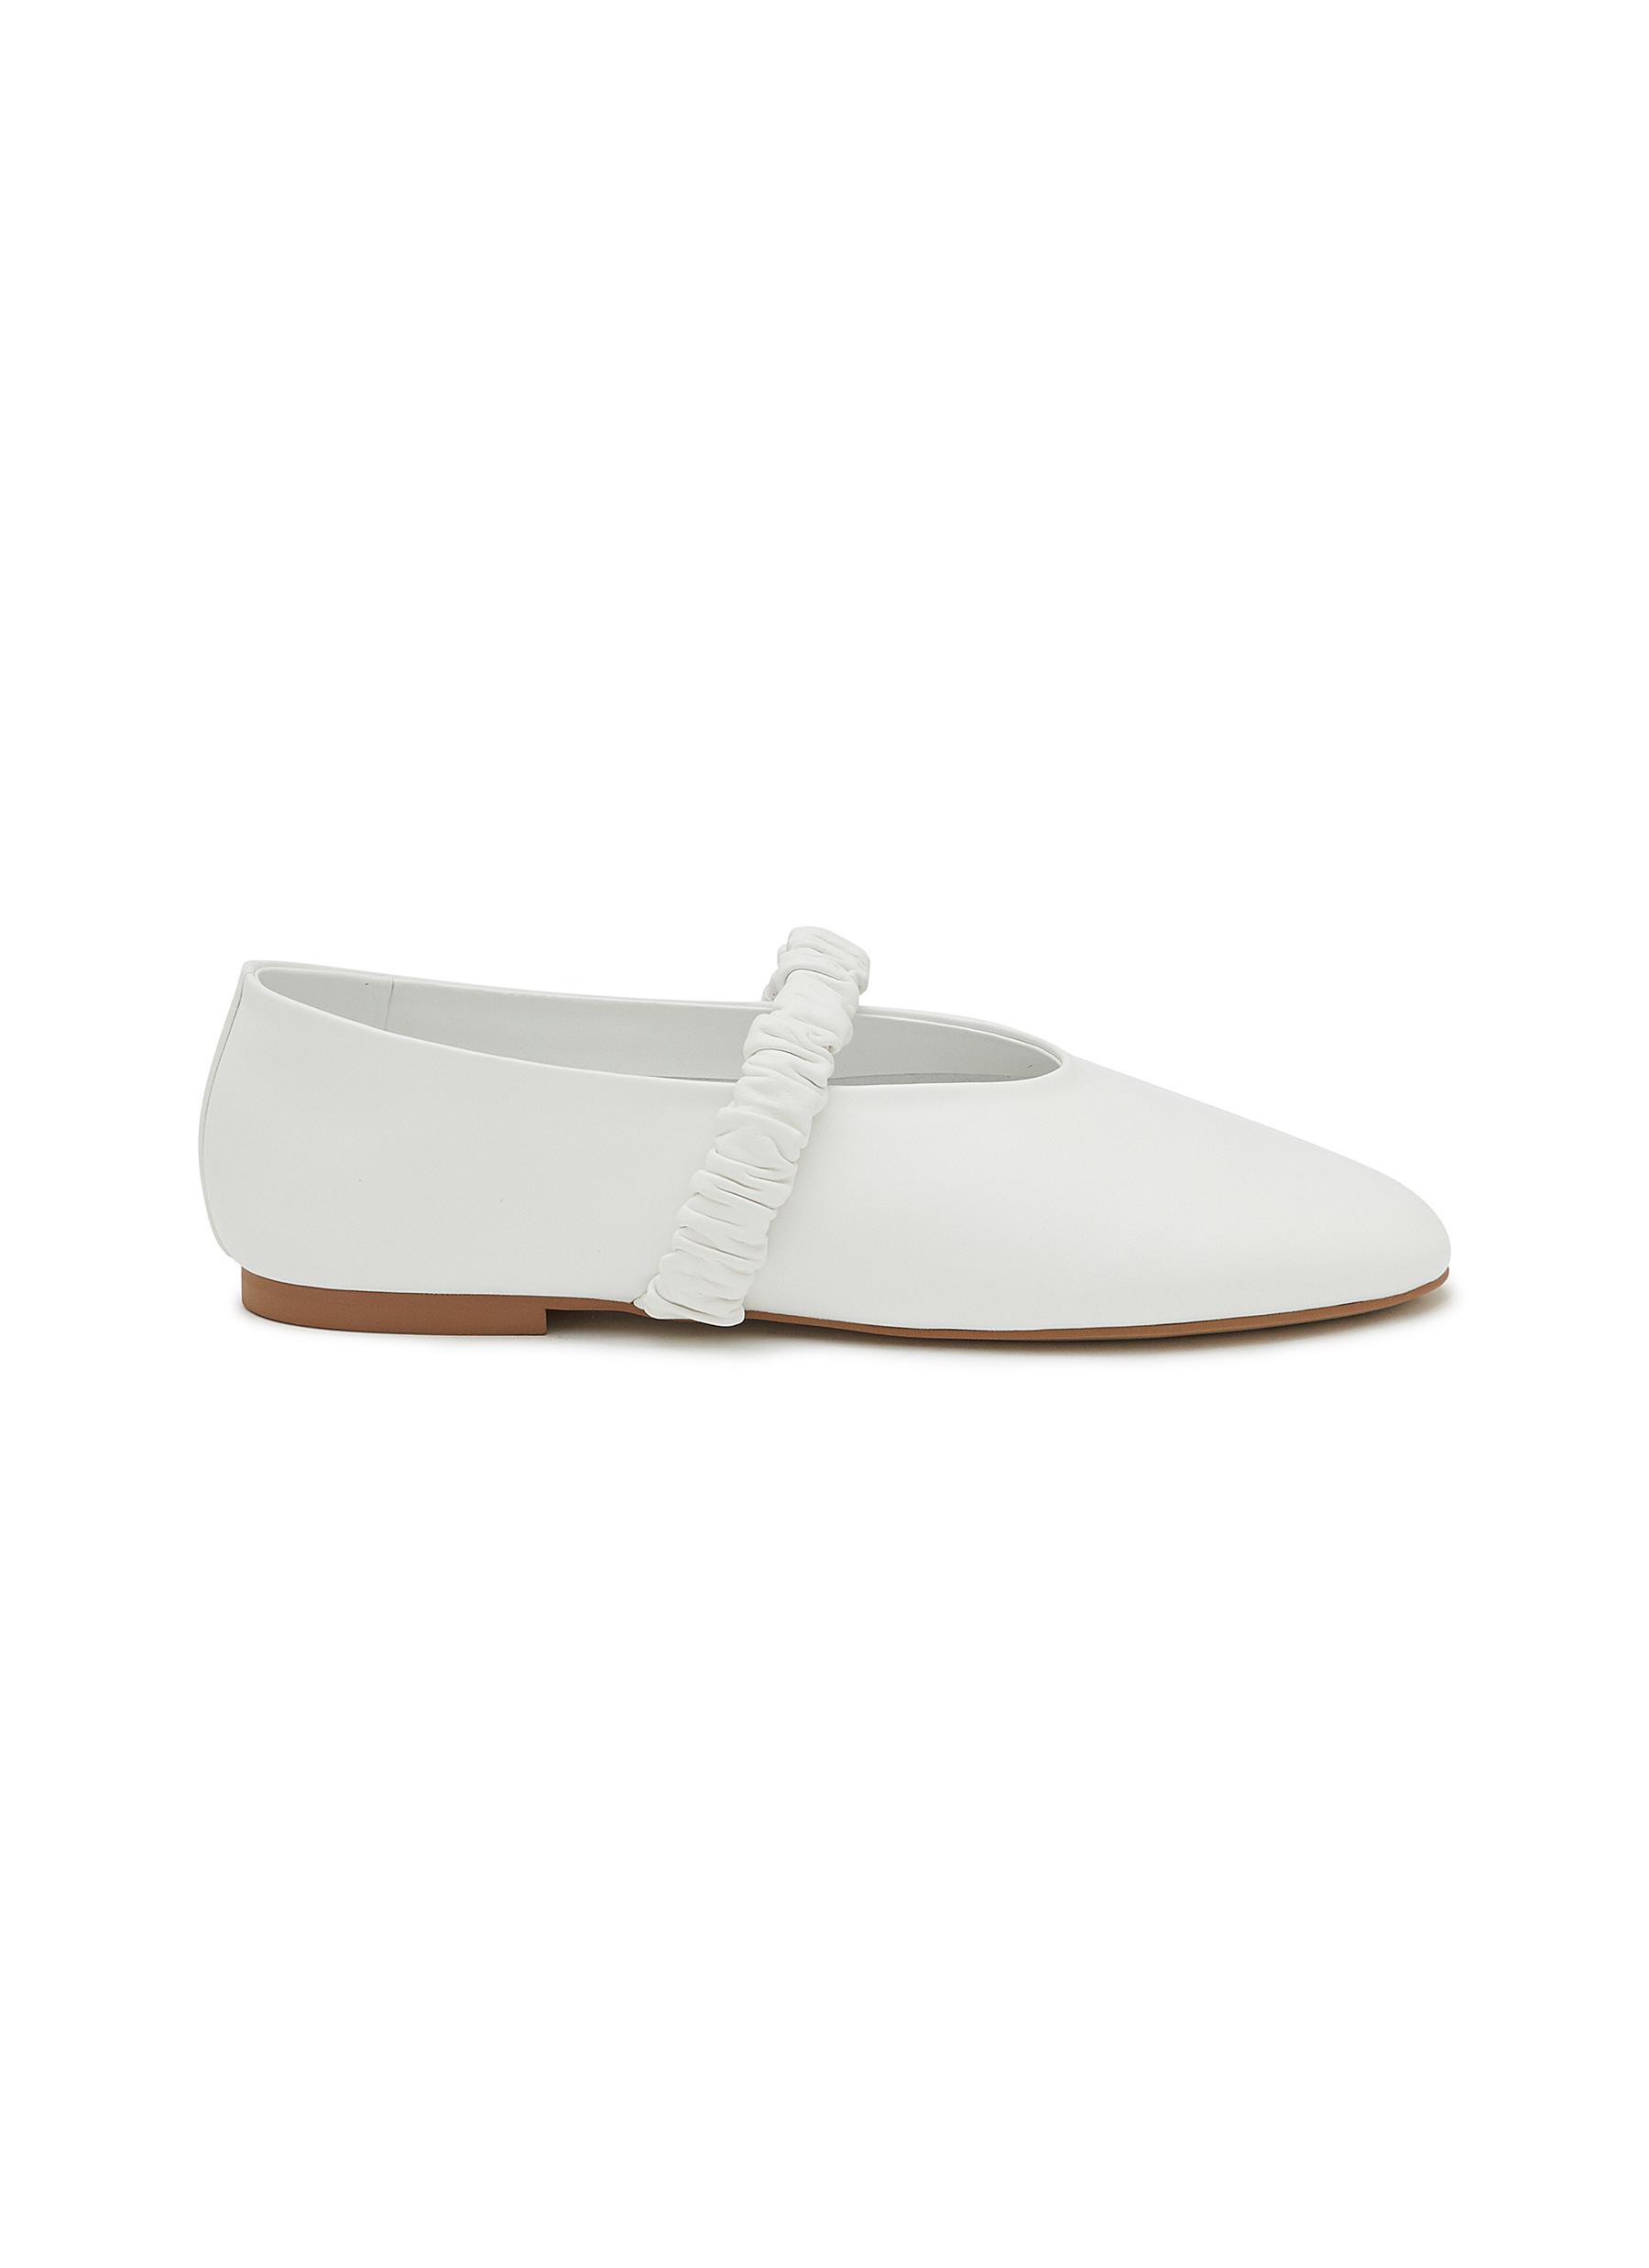 Pedder Red 'blake' Ruched Strap Leather Ballerina Flats In White